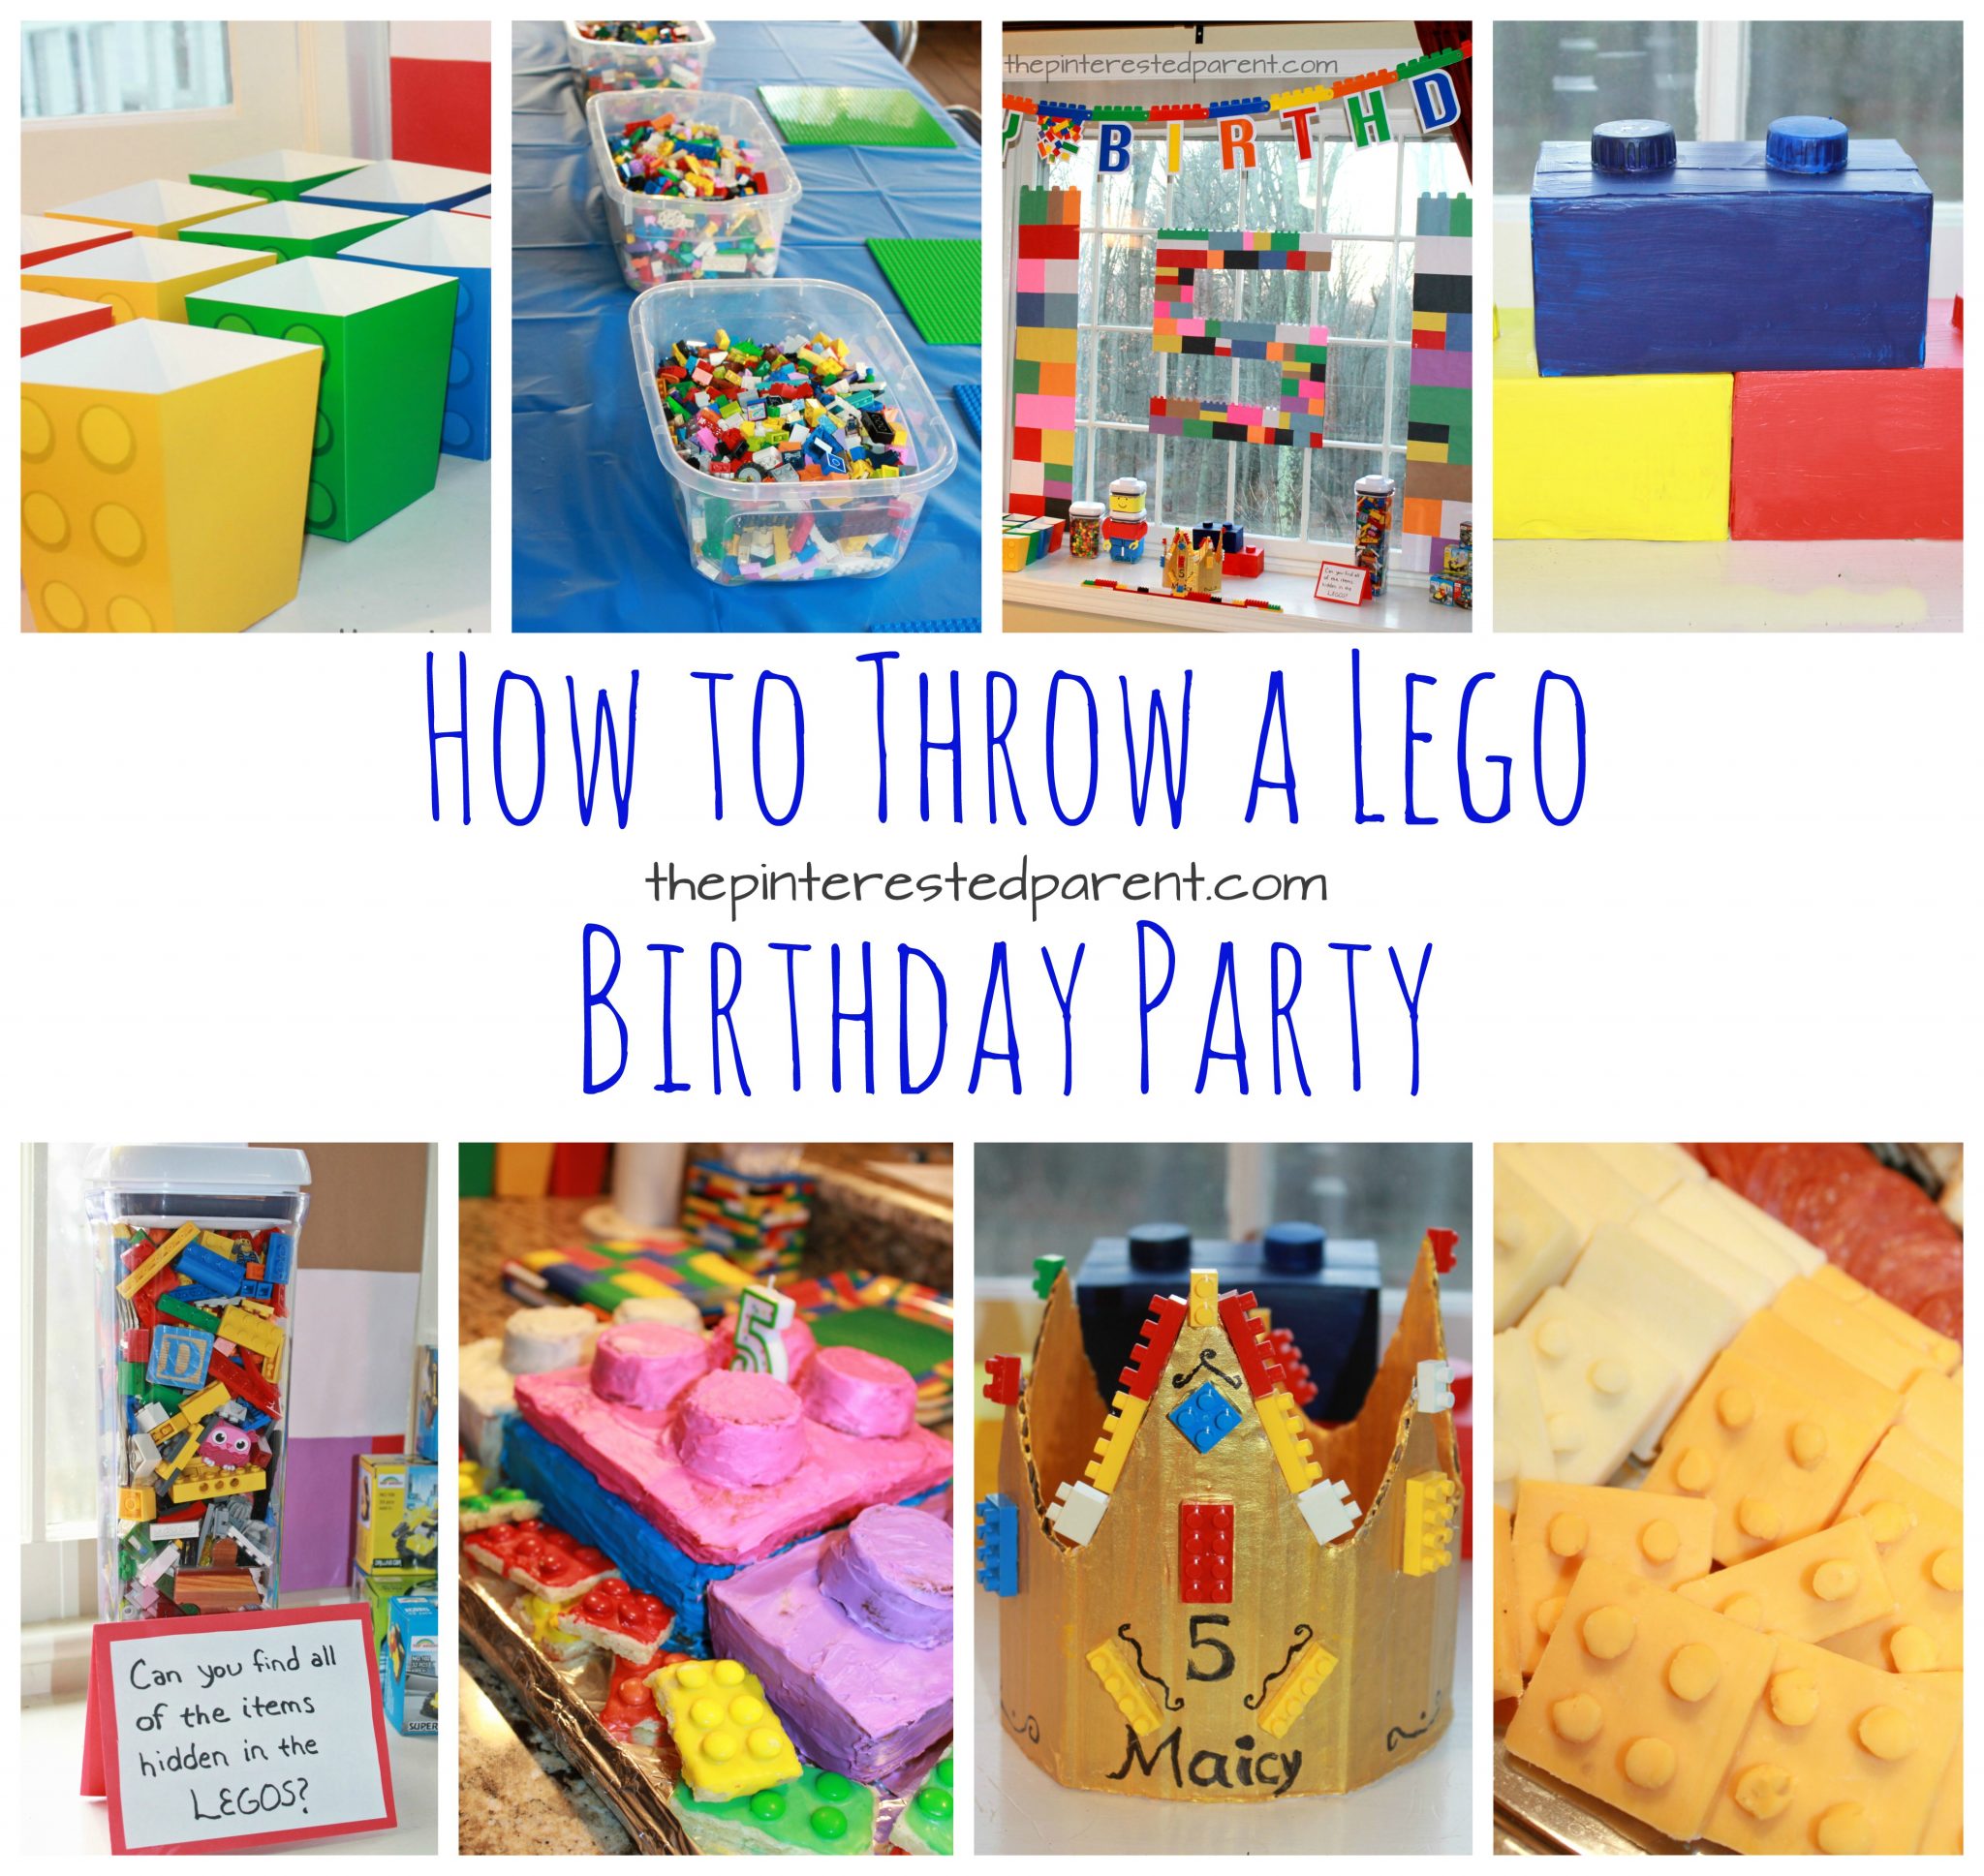 Great Lego birthday party ideas for kids. decorations, food and activities. Kid's